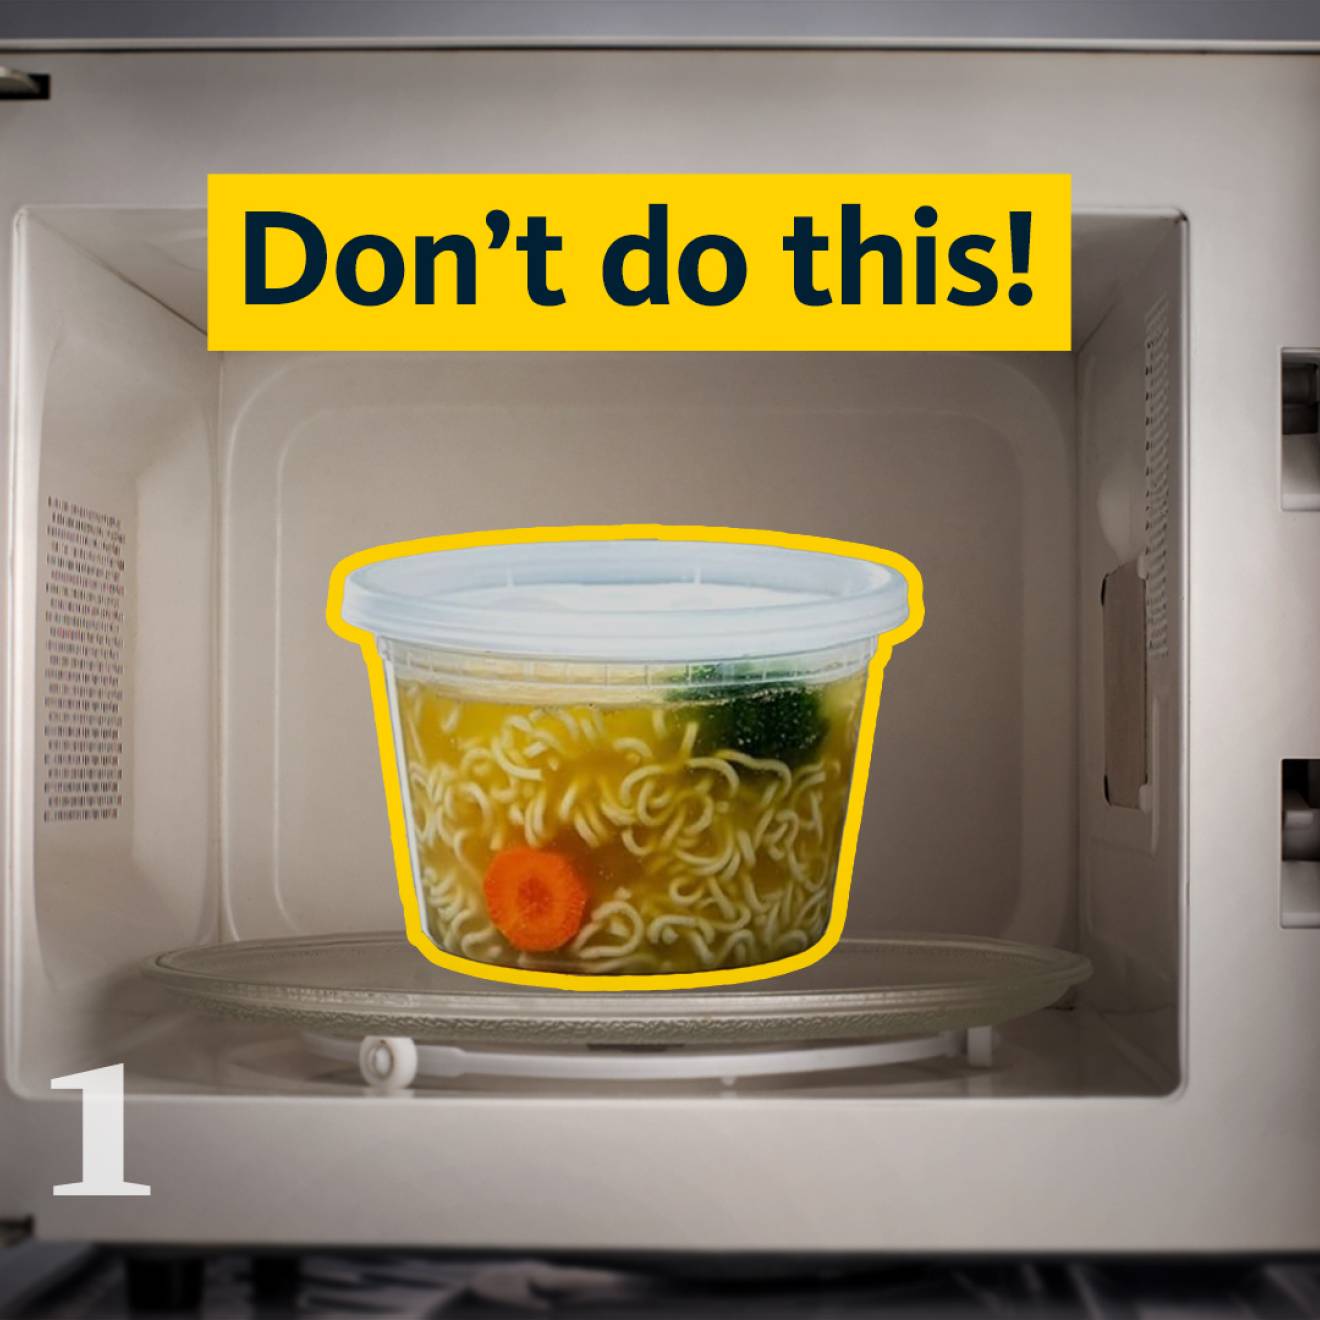 A photo collage showing the inside of a microwave with a plastic takeout container outlined in yellow with label reading "Don't do this!"